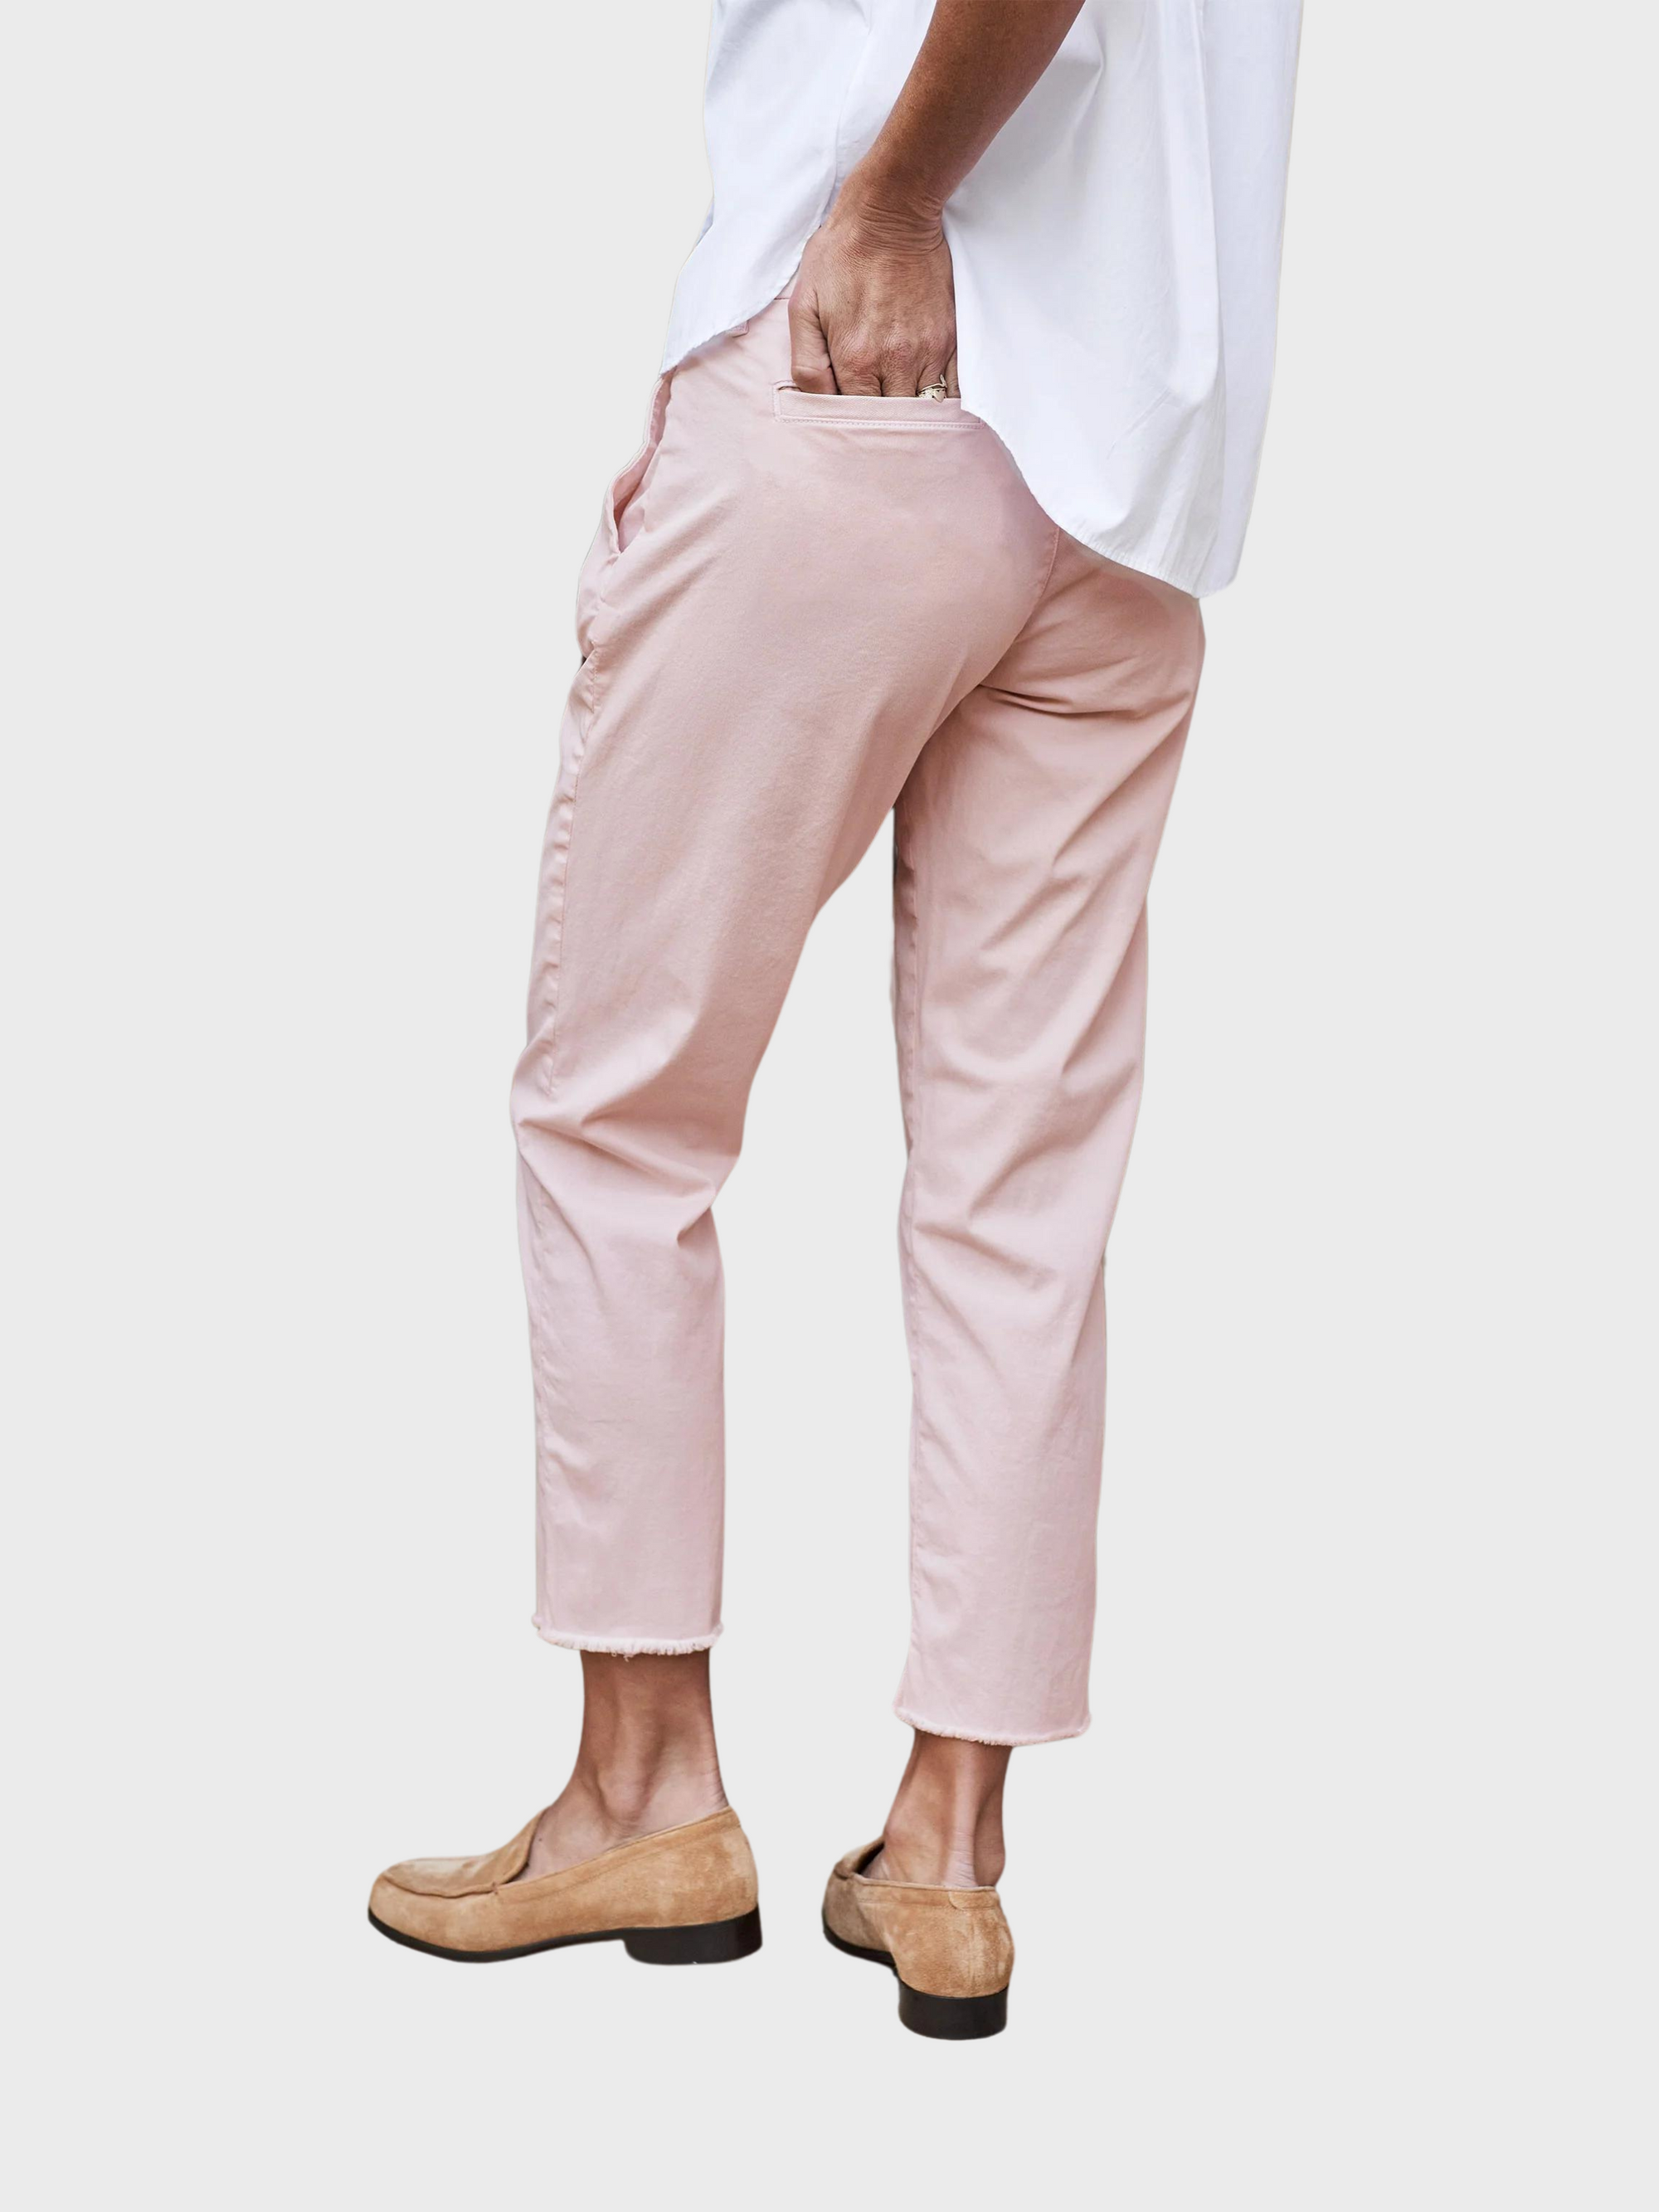 Frank & Eileen Wicklow Chino Vintage Rose-Pants-West of Woodward Boutique-Vancouver-Canada